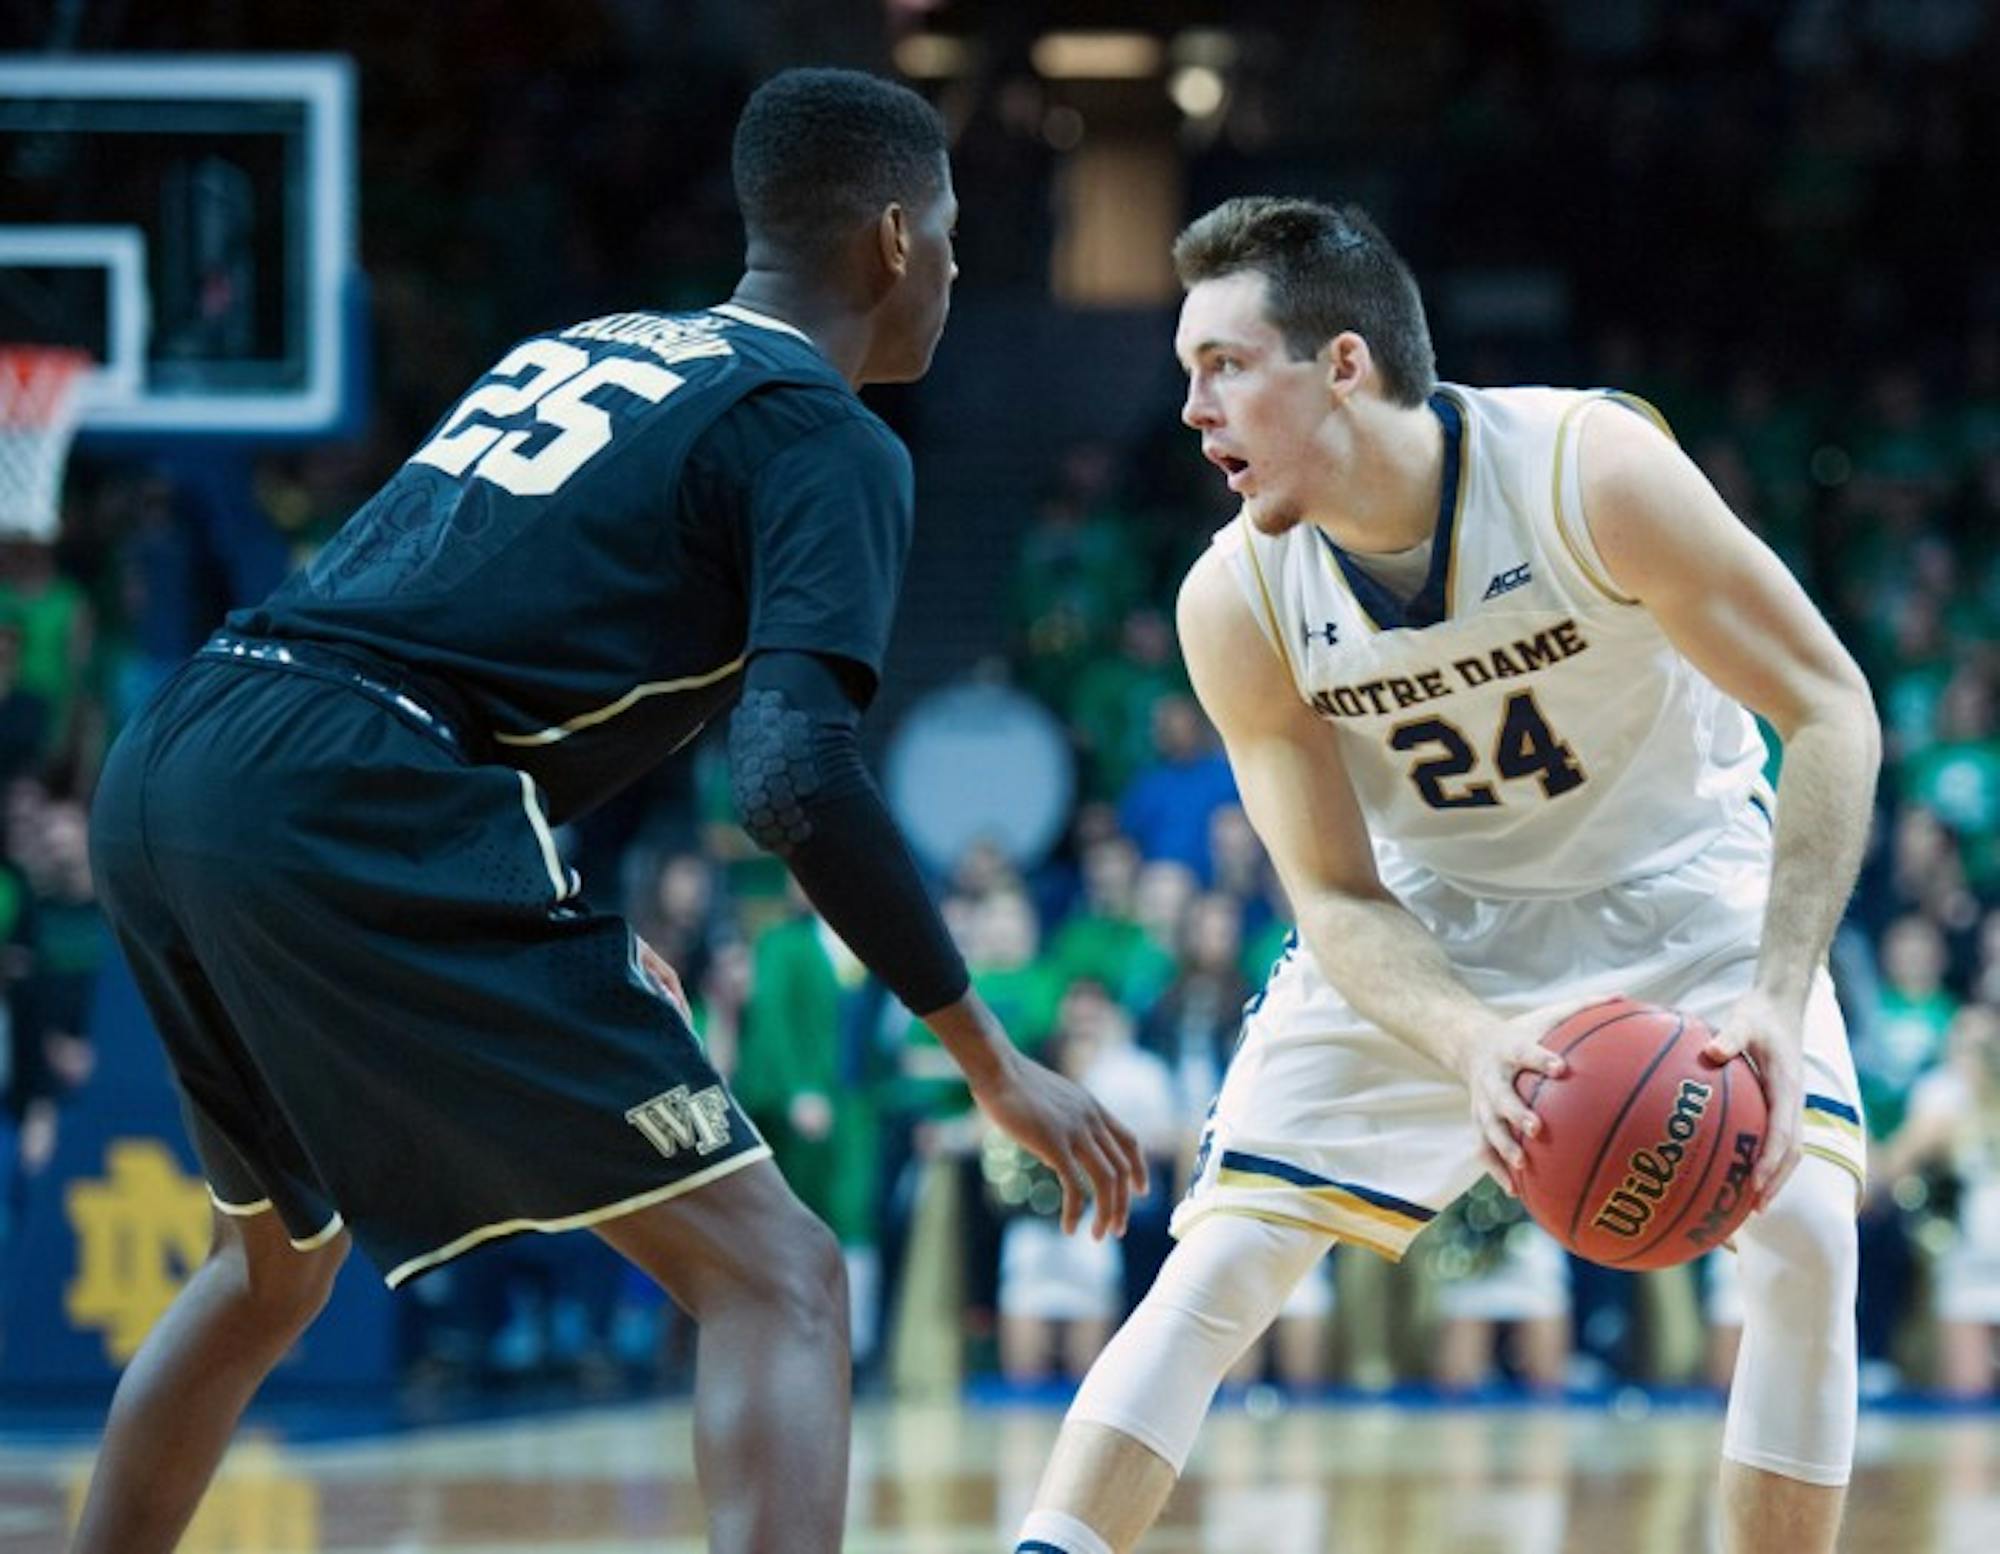 Irish senior guard/forward Pat Connaughton surveys the court during Notre Dame’s 88-75 win over Wake Forest on Tuesday.